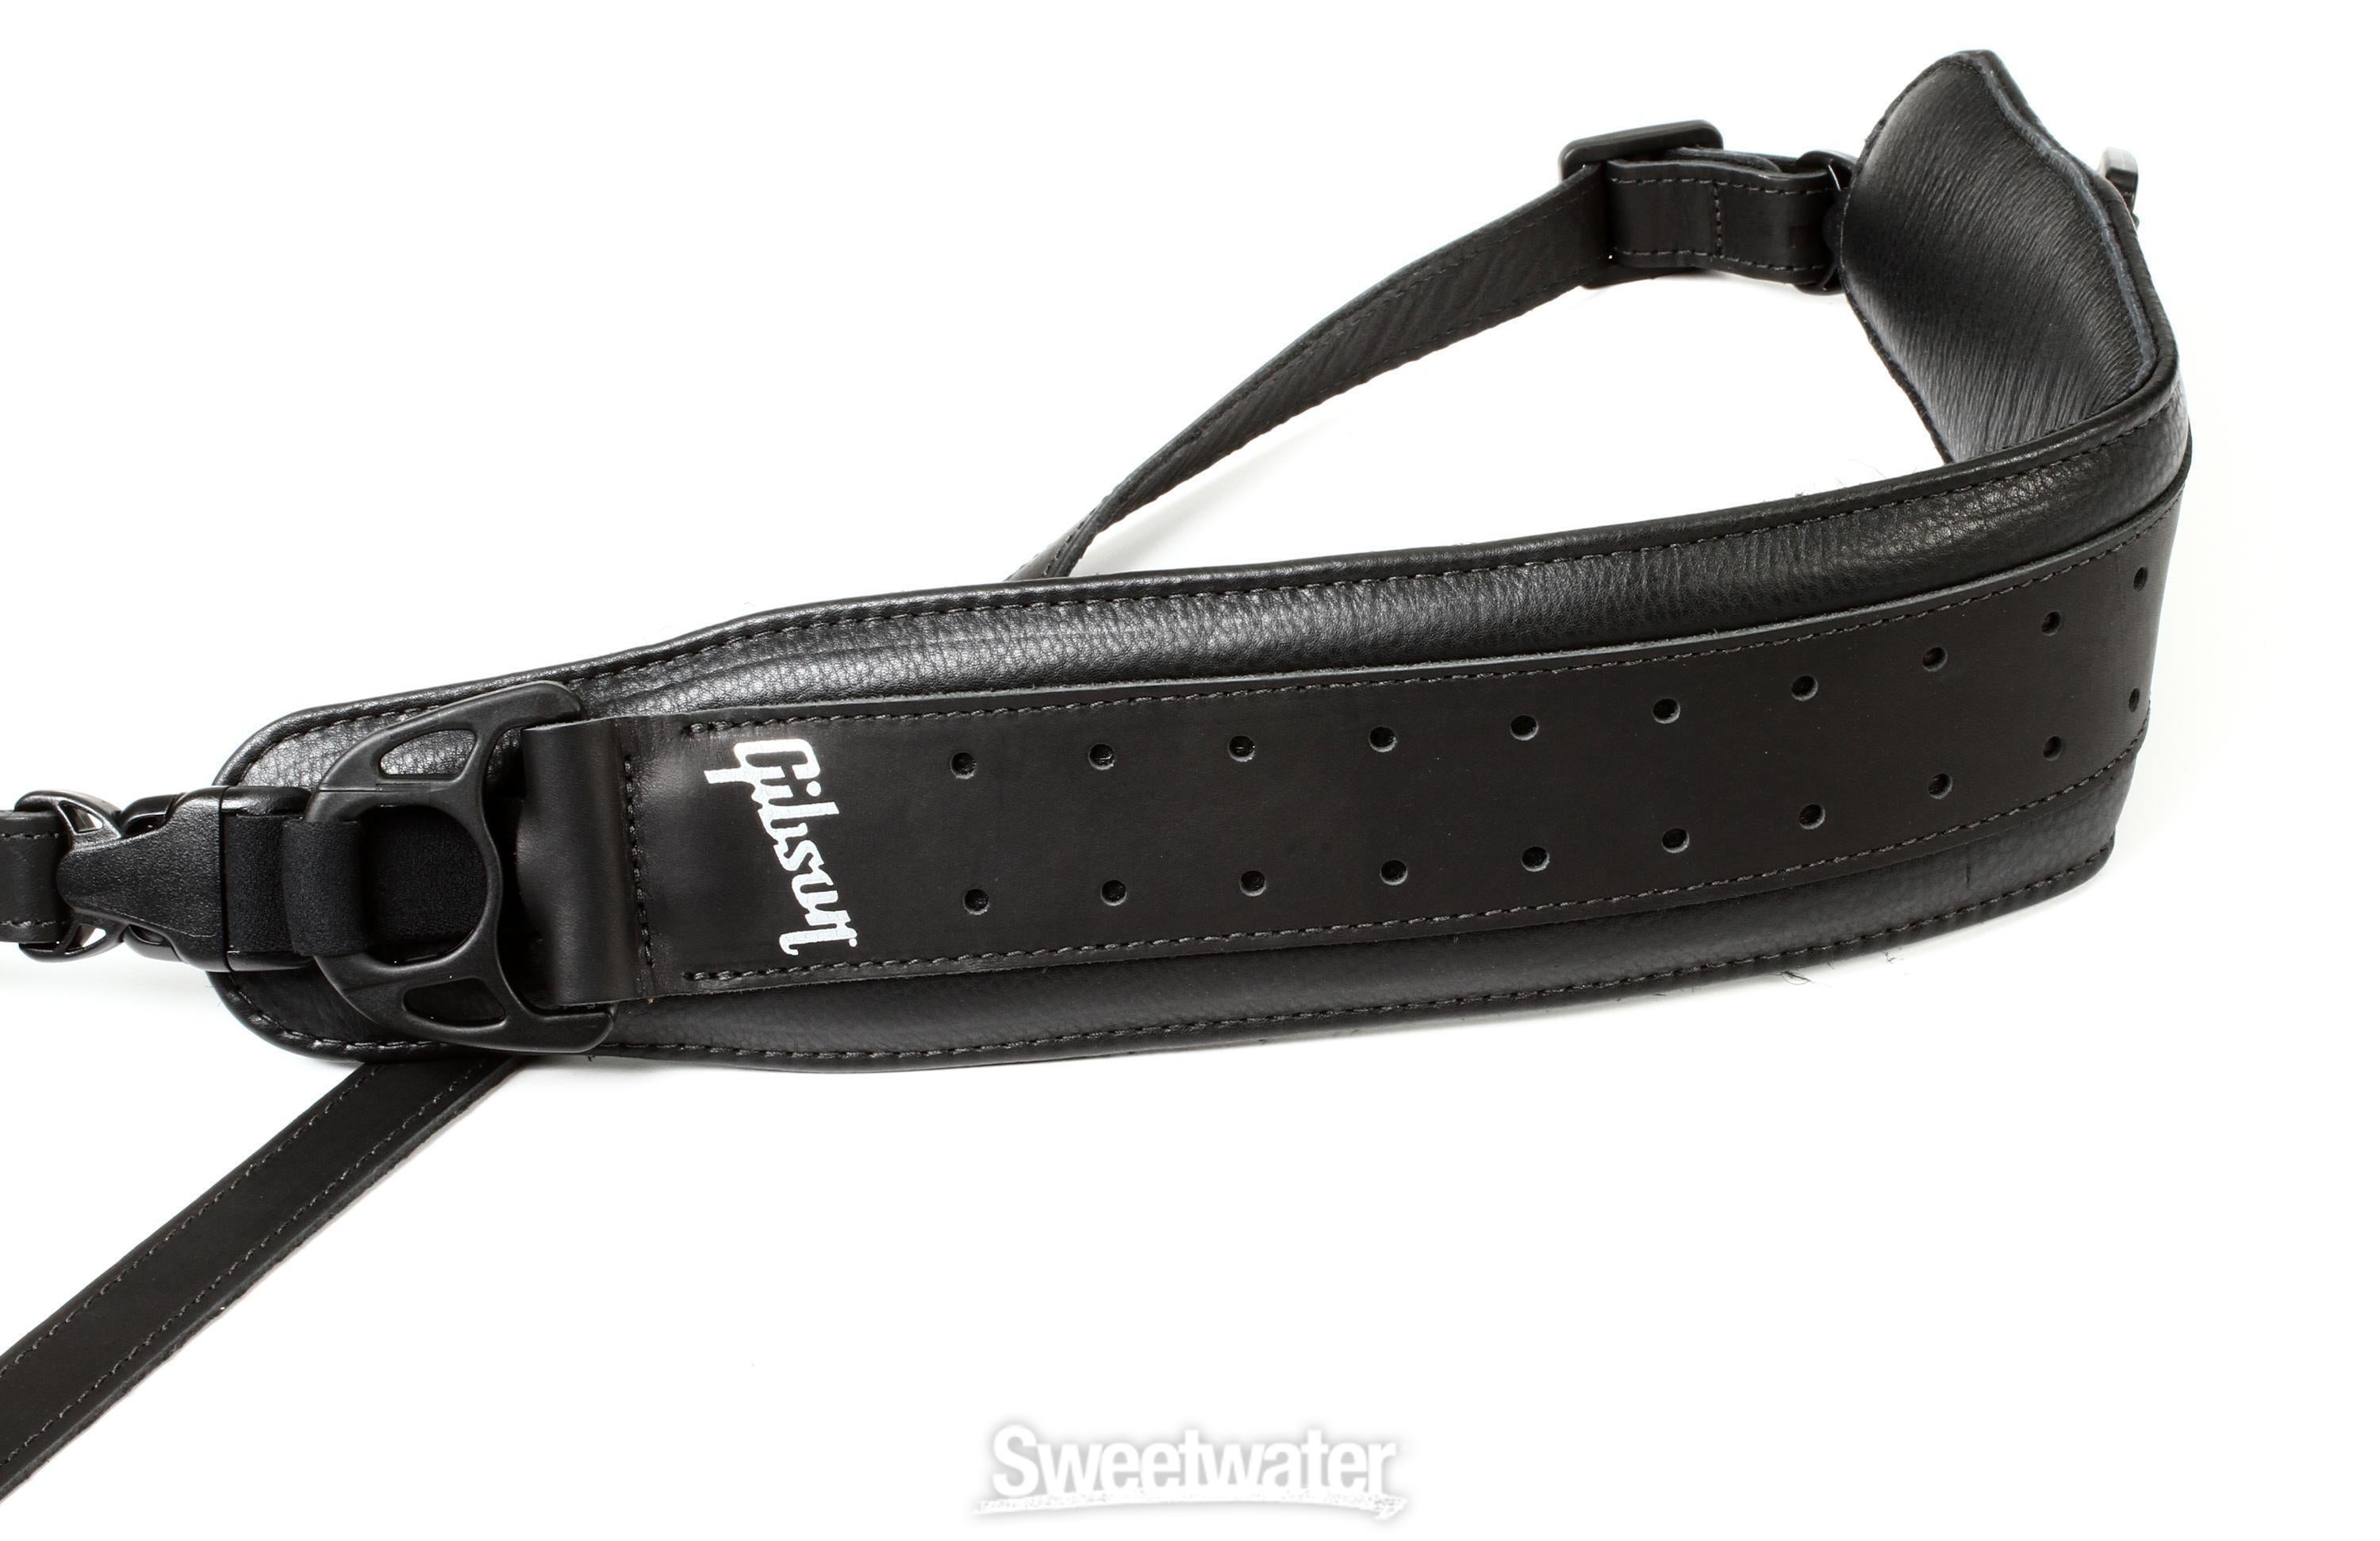 Gibson Accessories Switchblade Guitar Strap | Sweetwater